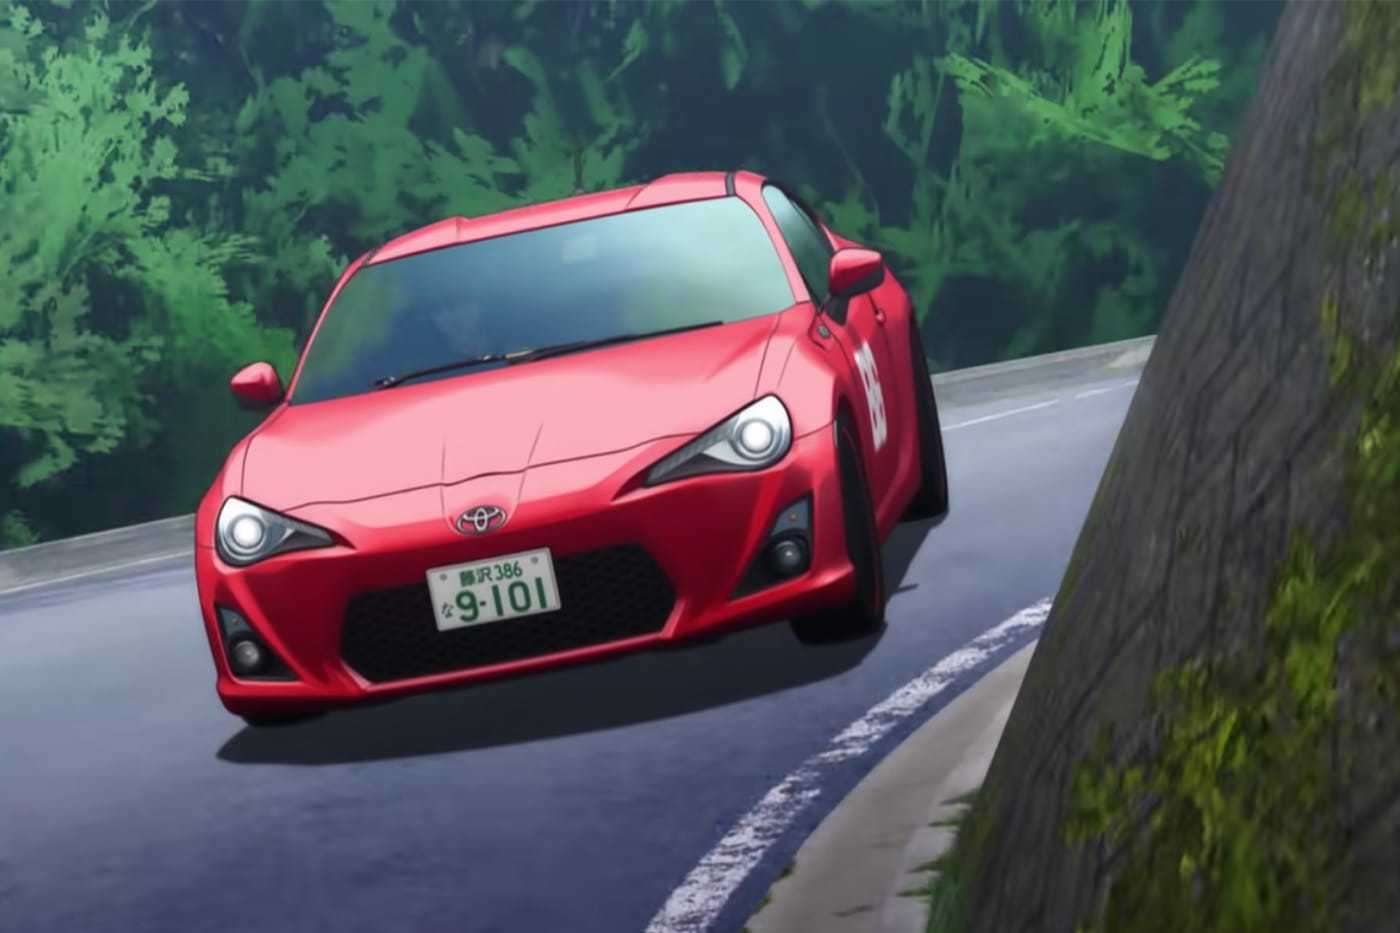 Eurobeat intensifies Initial D sequel anime will stay the course with  dance music soundtrackVid  SoraNews24 Japan News